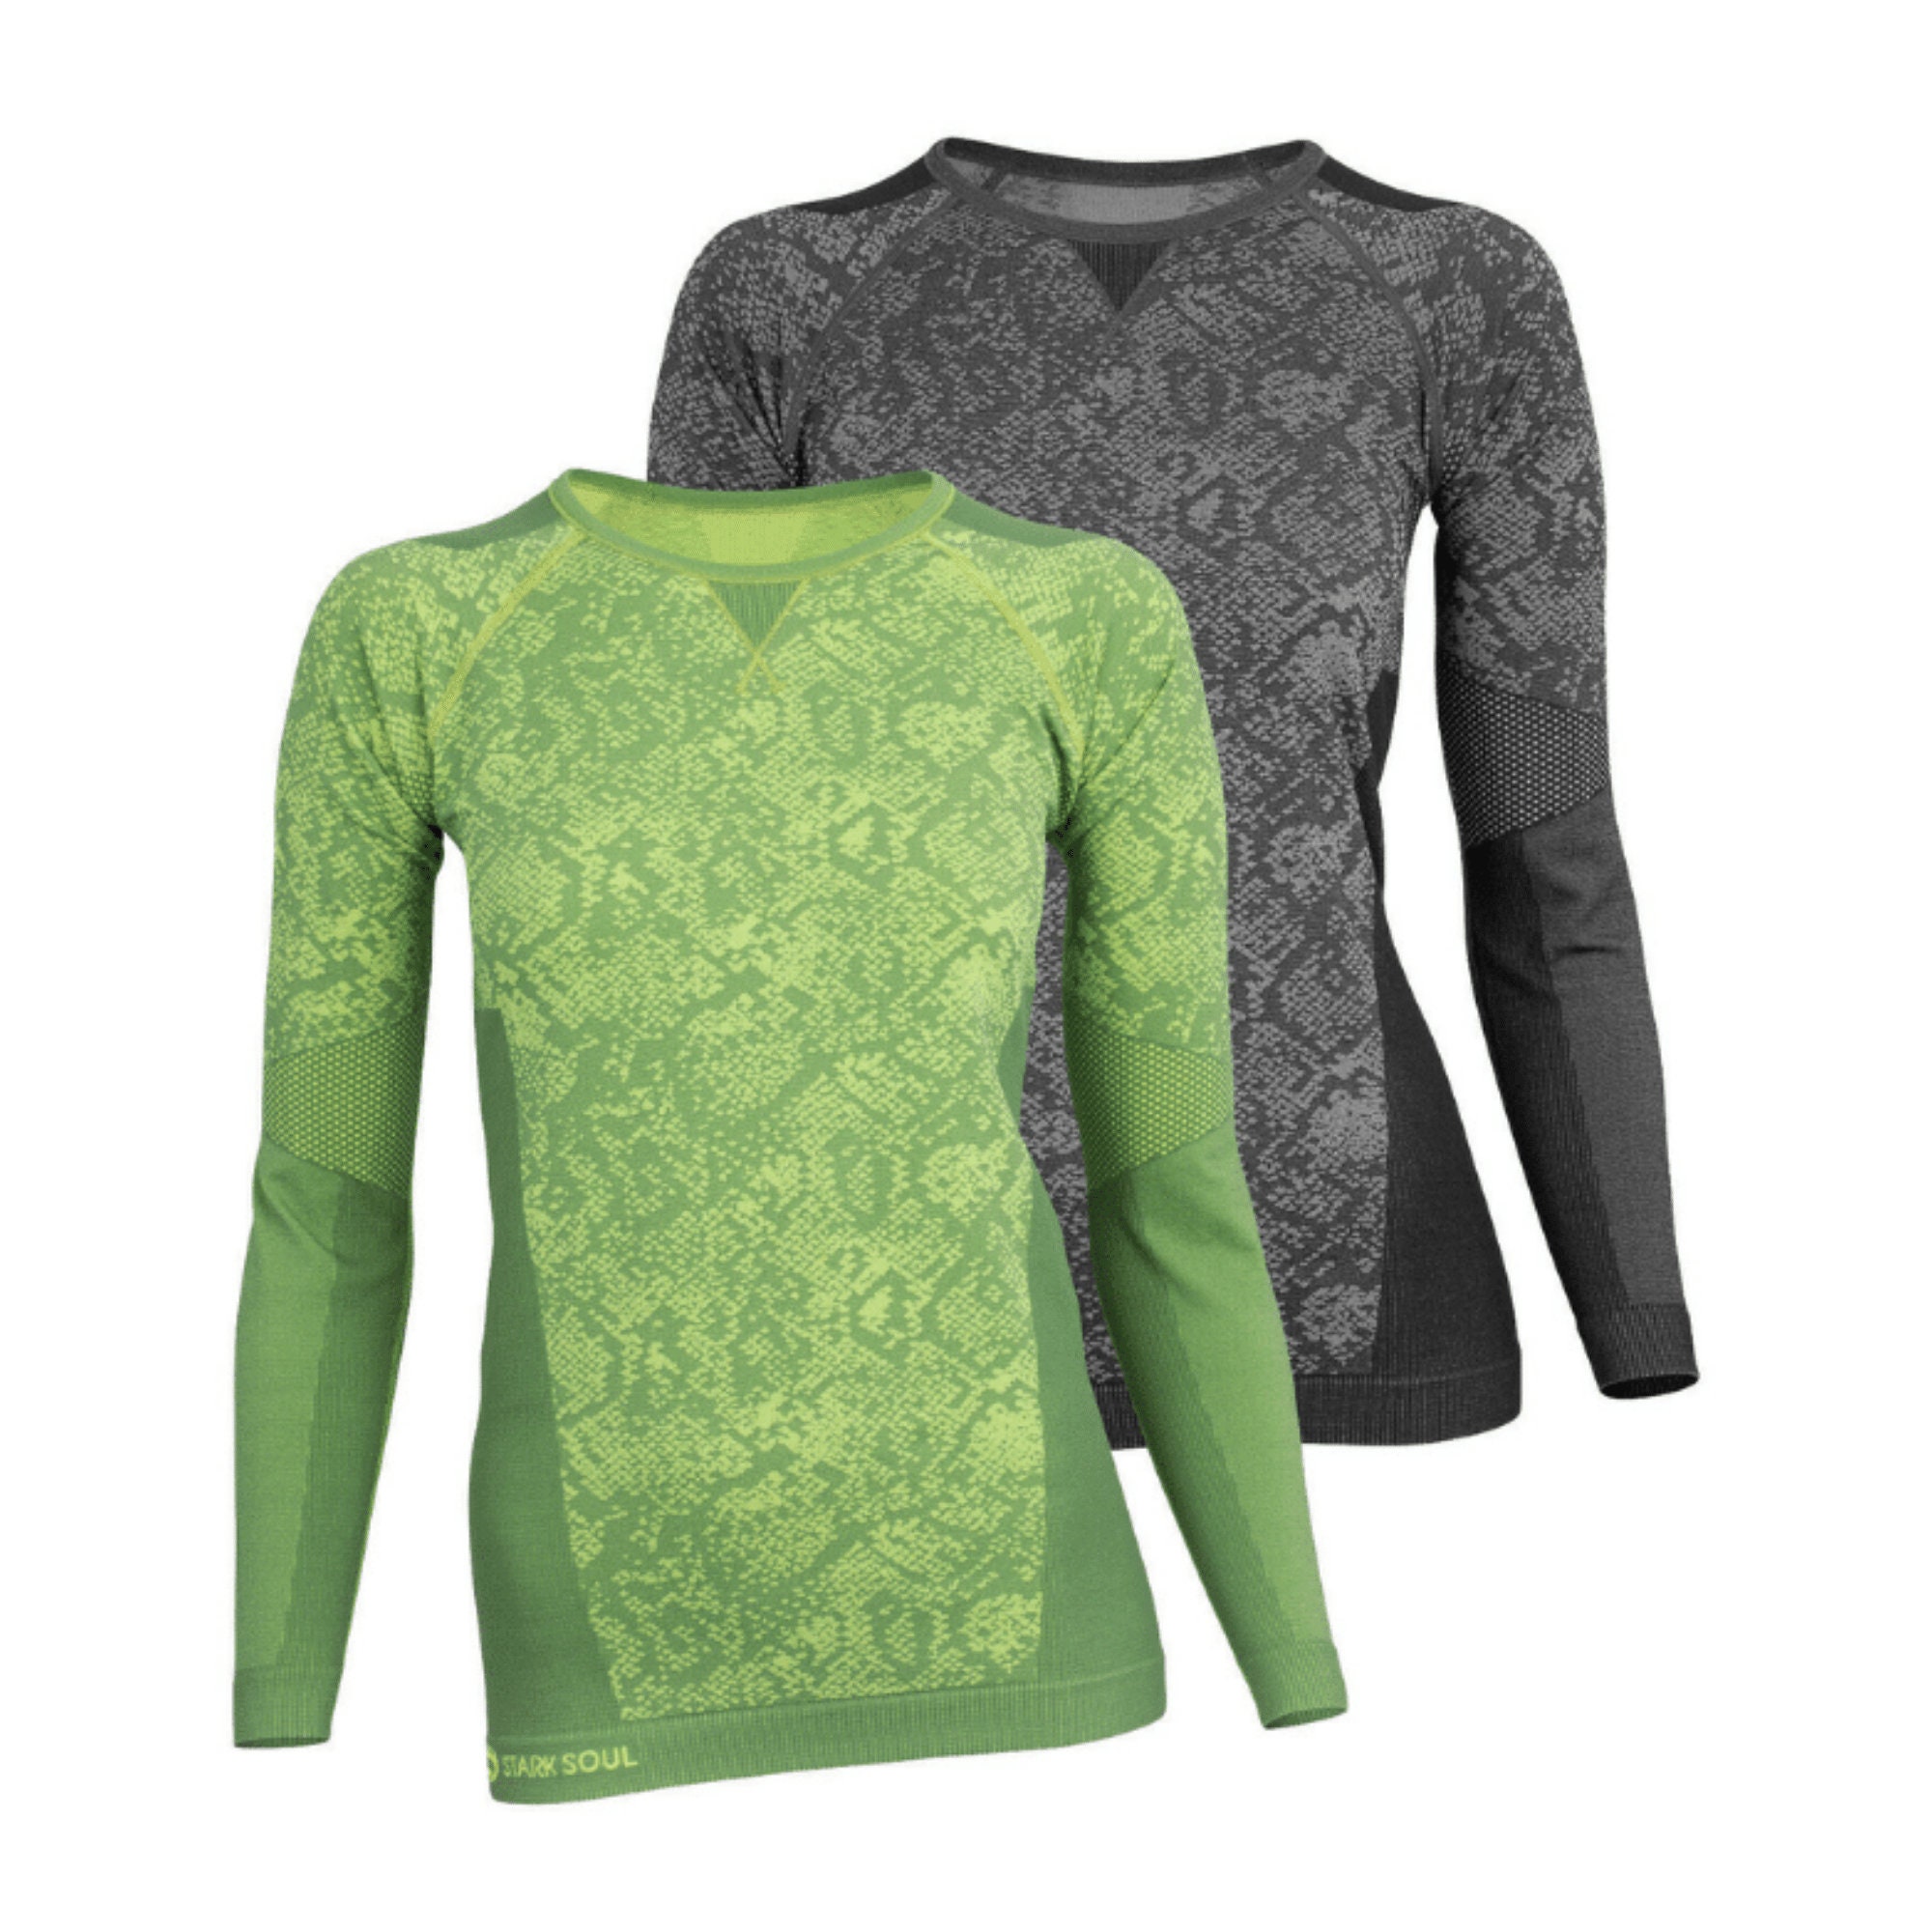 available Long Sleeve Shirt or Pants Technical Outdoor THERMAL Underwear STARK SOUL Ladies/Womens SKI Underwear 